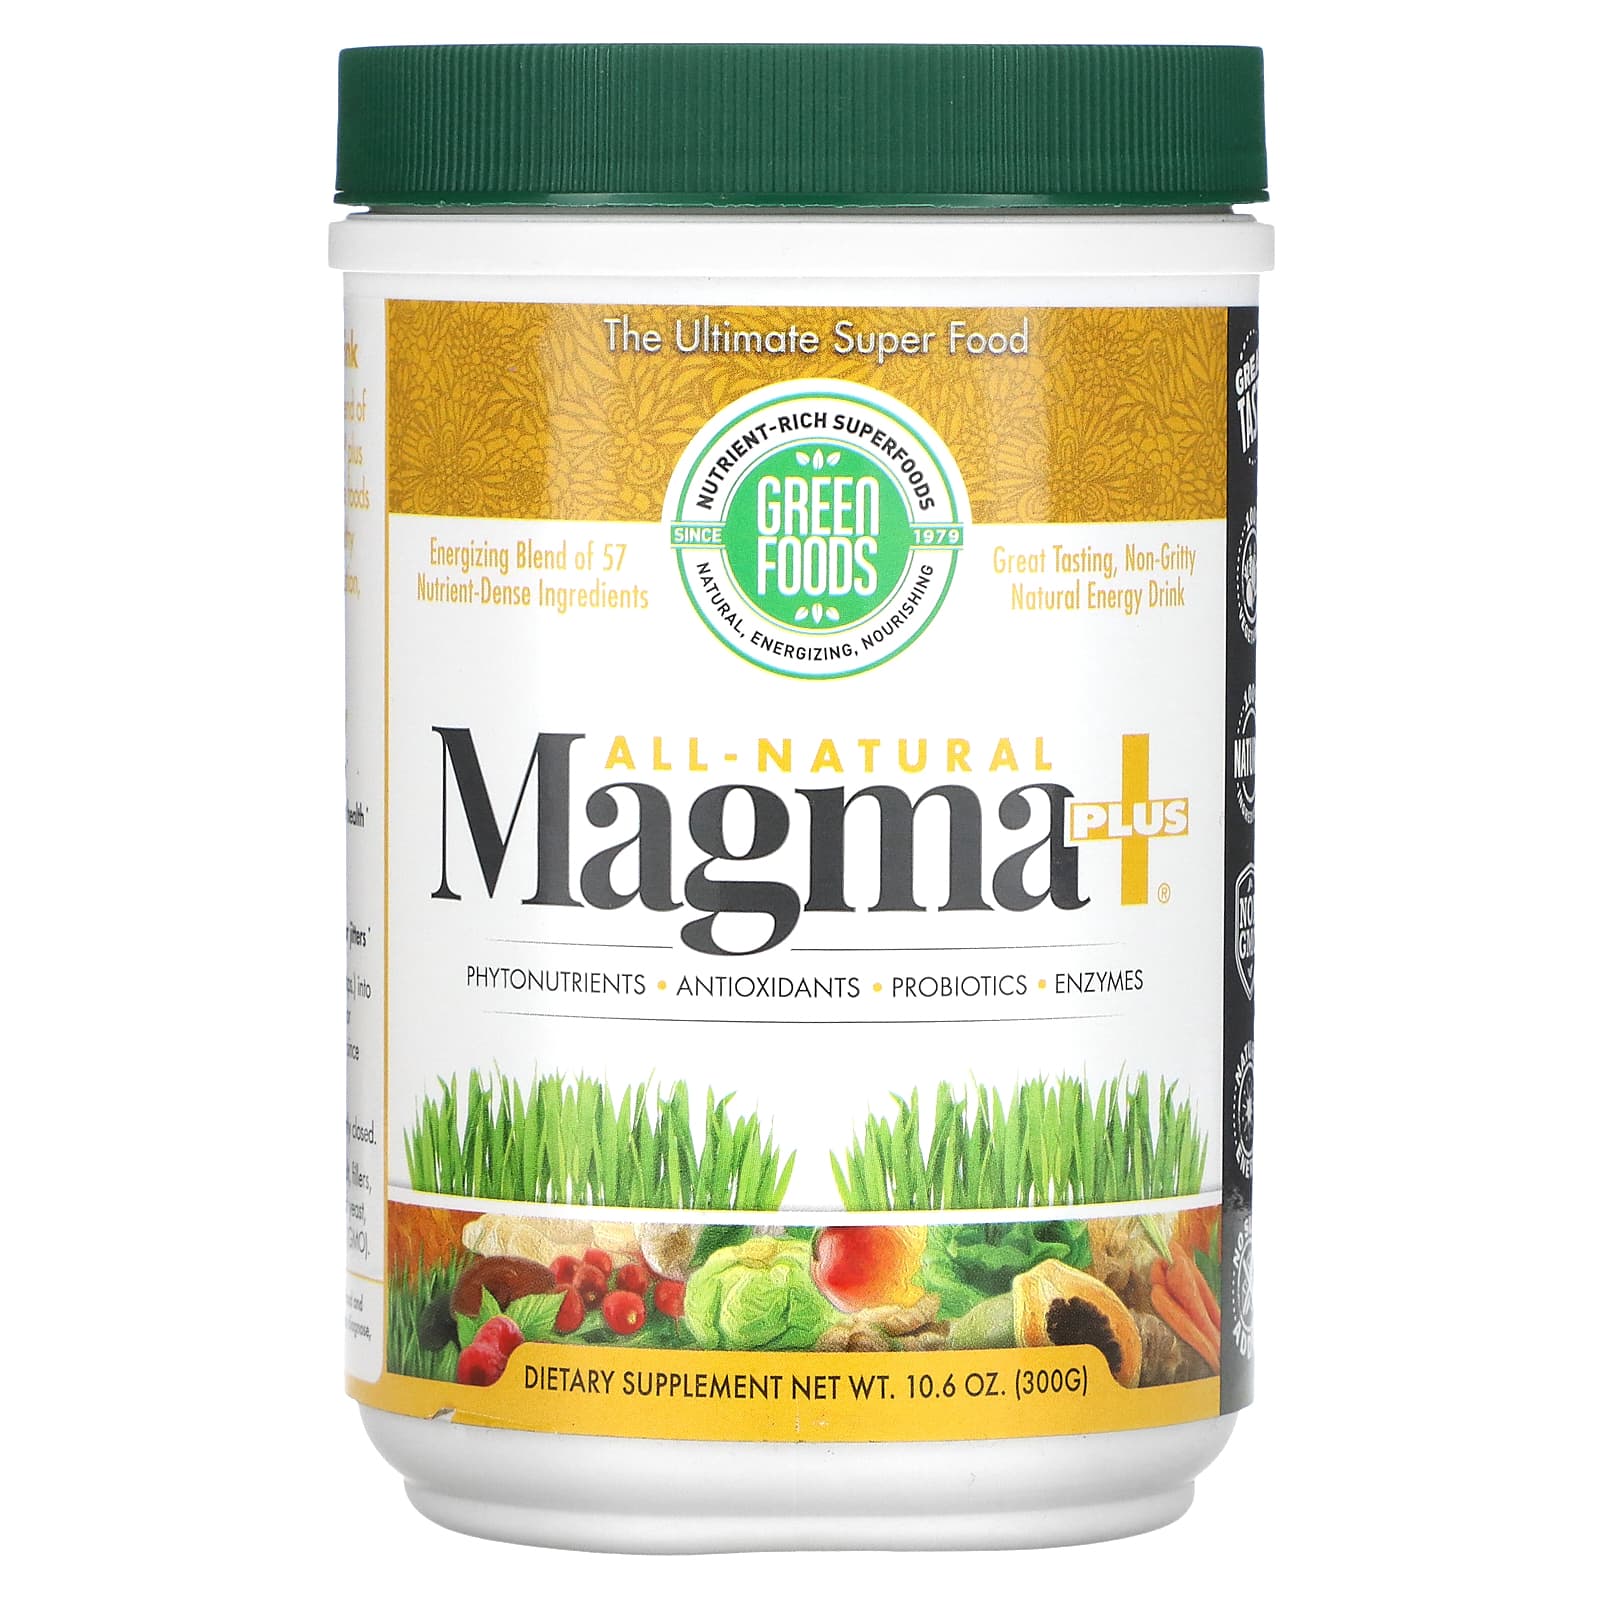 Green Foods Corporation All-Natural Magma Plus 10.6 oz (300 g)